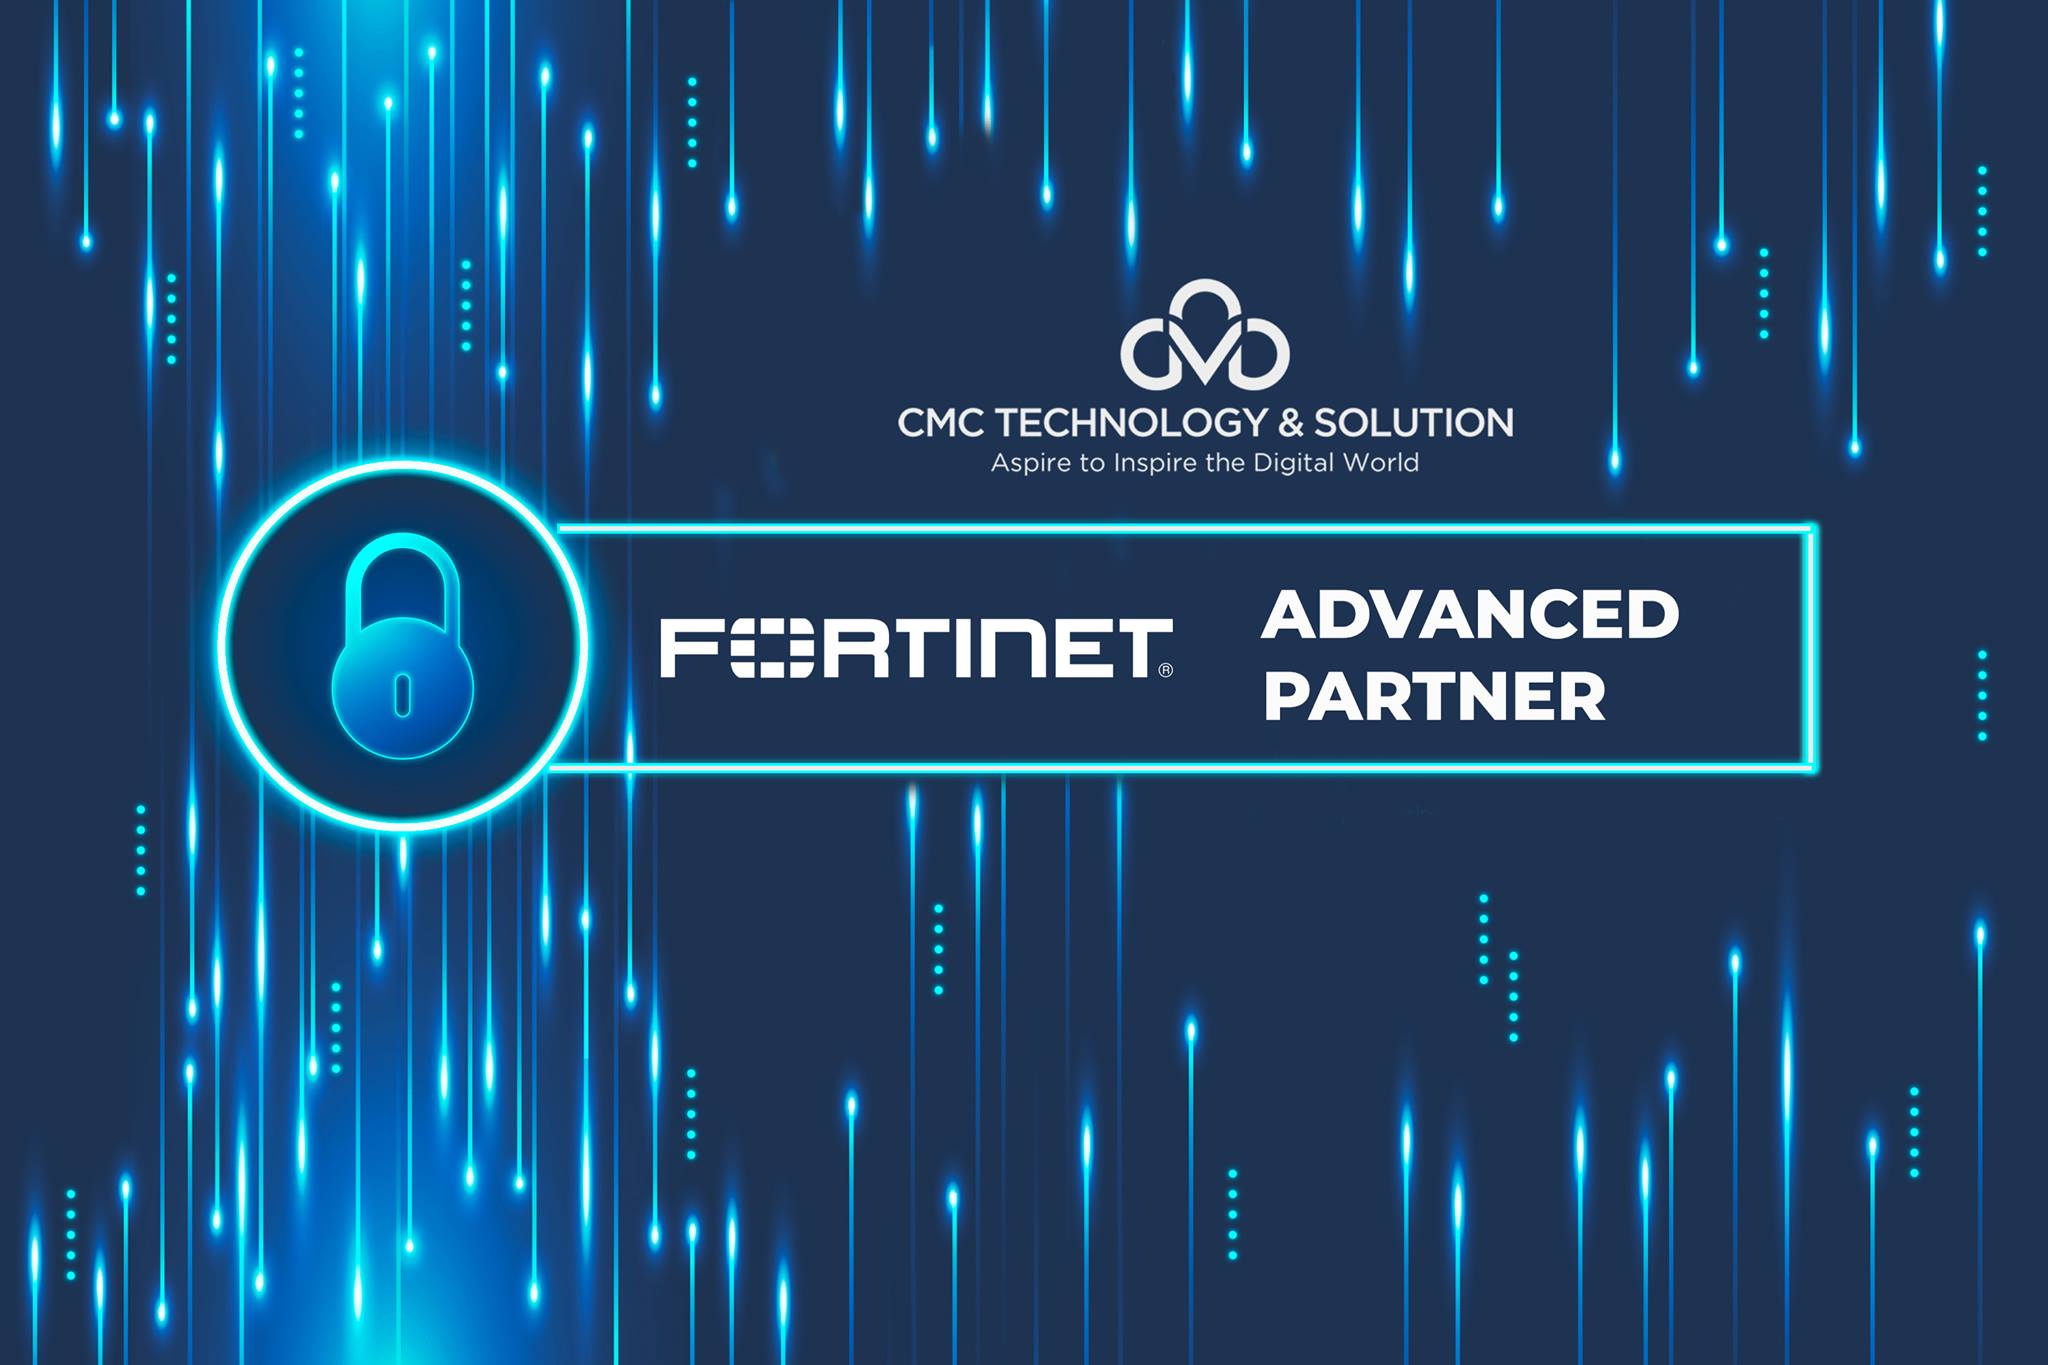 CMC TS officially becomes Advanced Partner of Fortinet